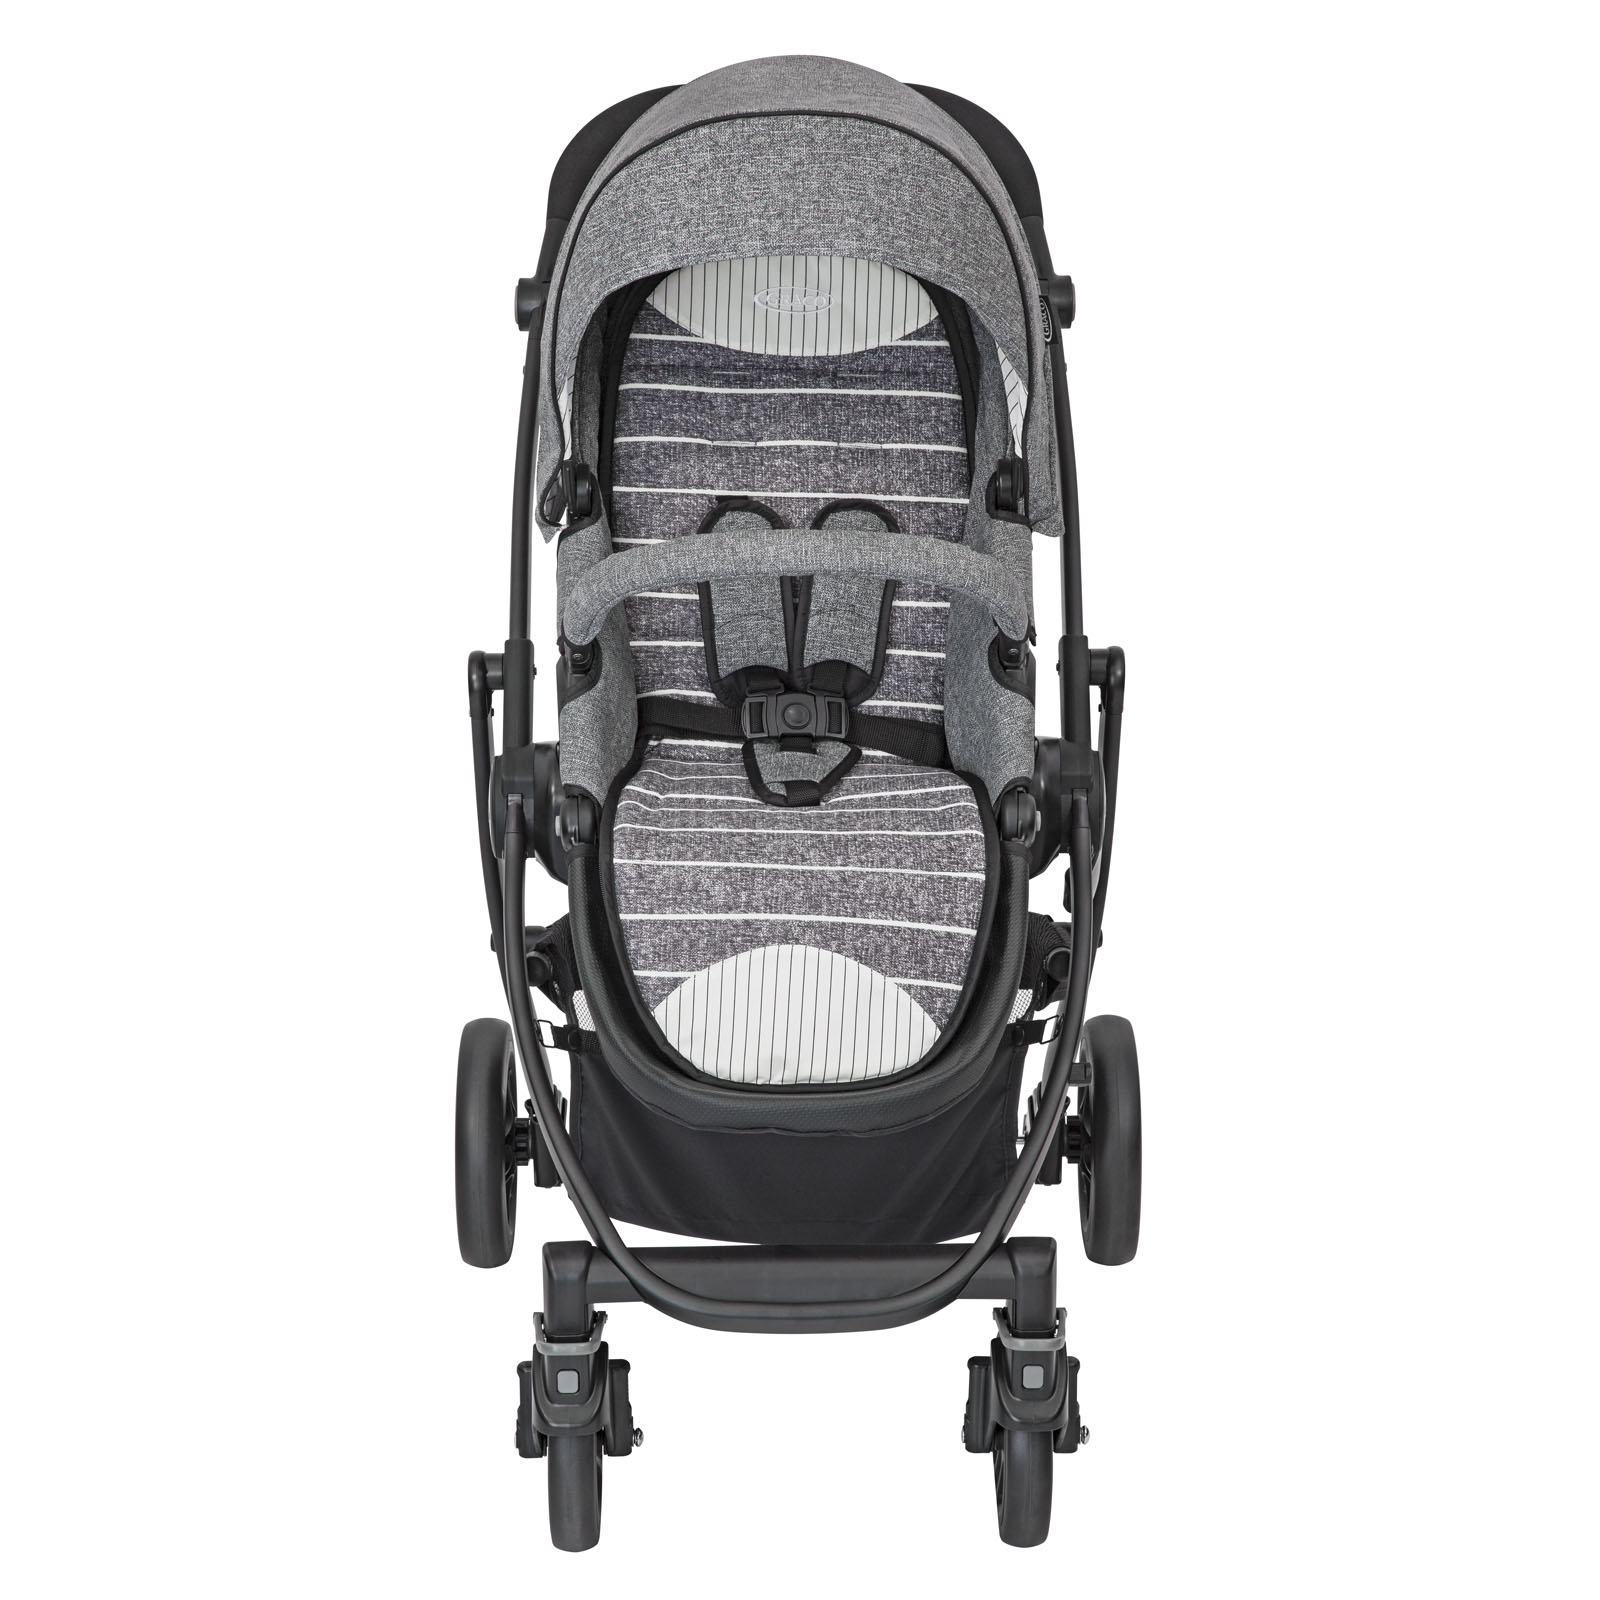 Graco Evo (SnugEssentials Car Seat i-Size) Travel System with Carrycot